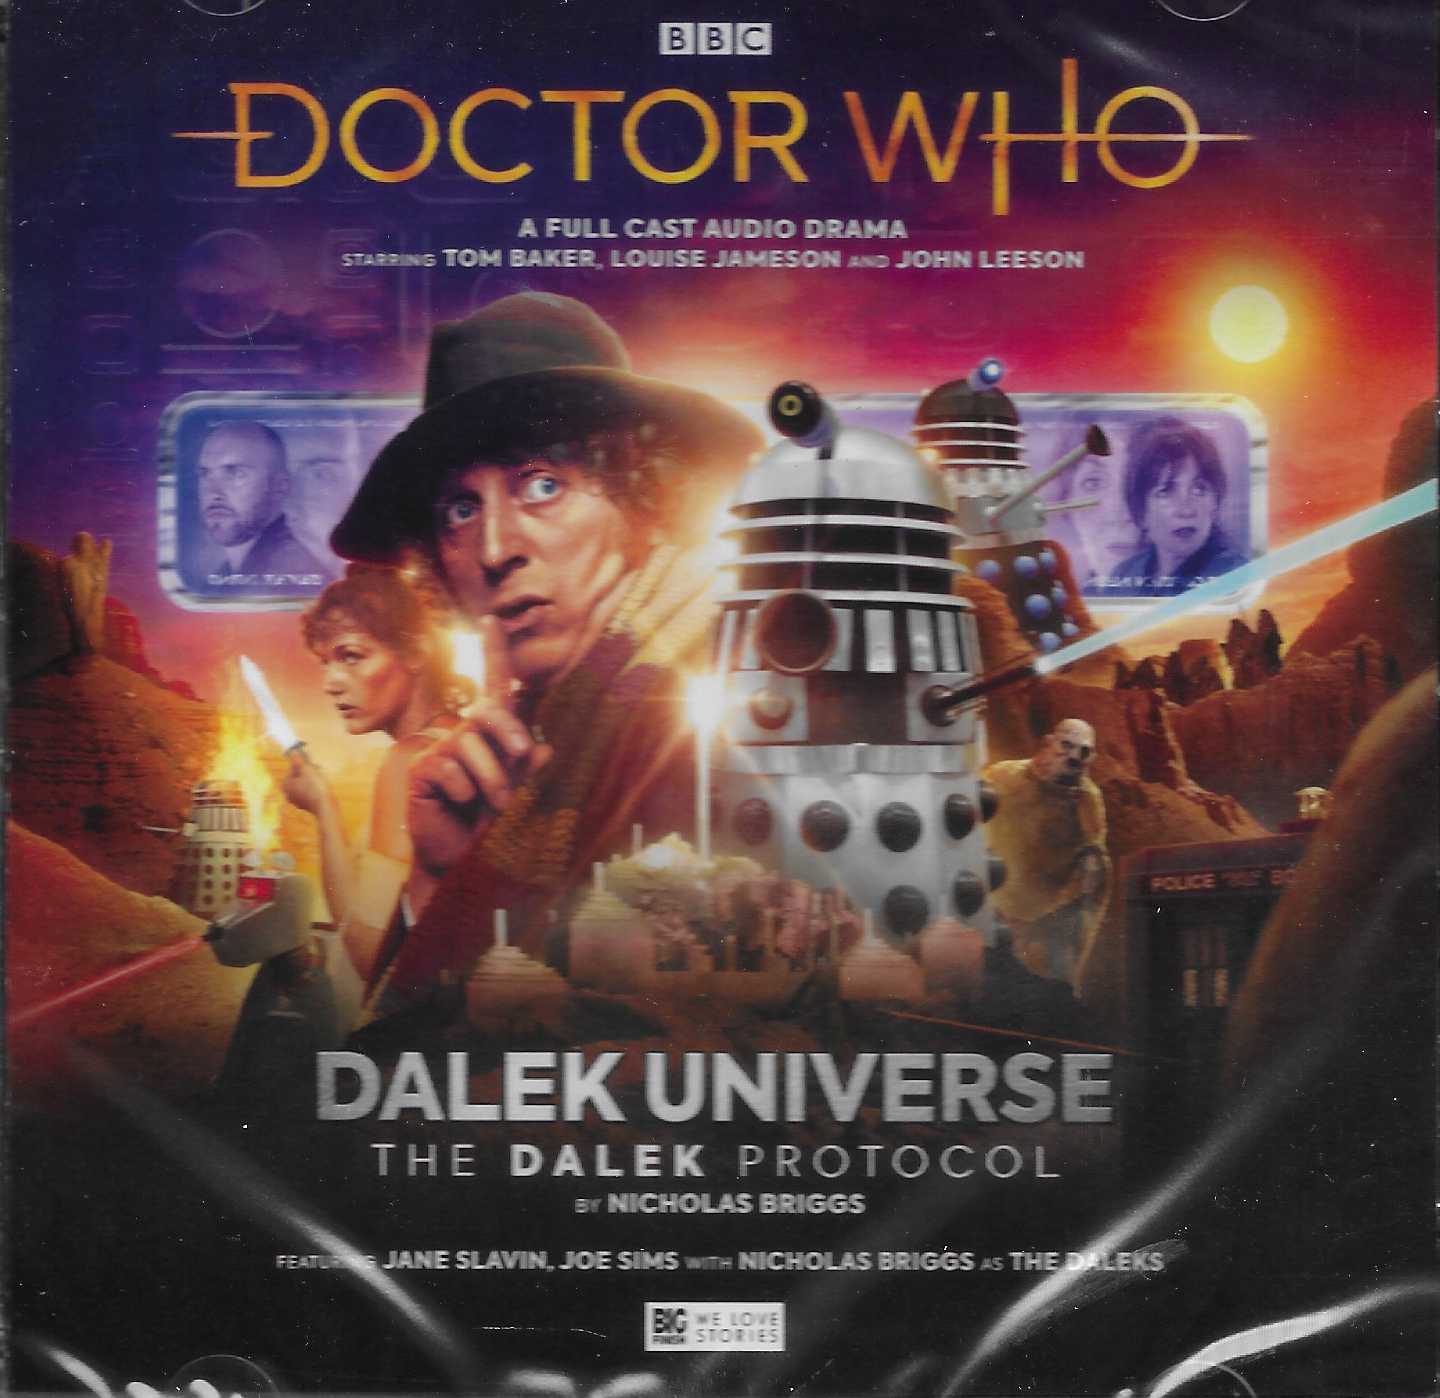 Picture of Doctor Who - Dalek universe - The Dalek protocol by artist Nicholas Briggs from the BBC cds - Records and Tapes library